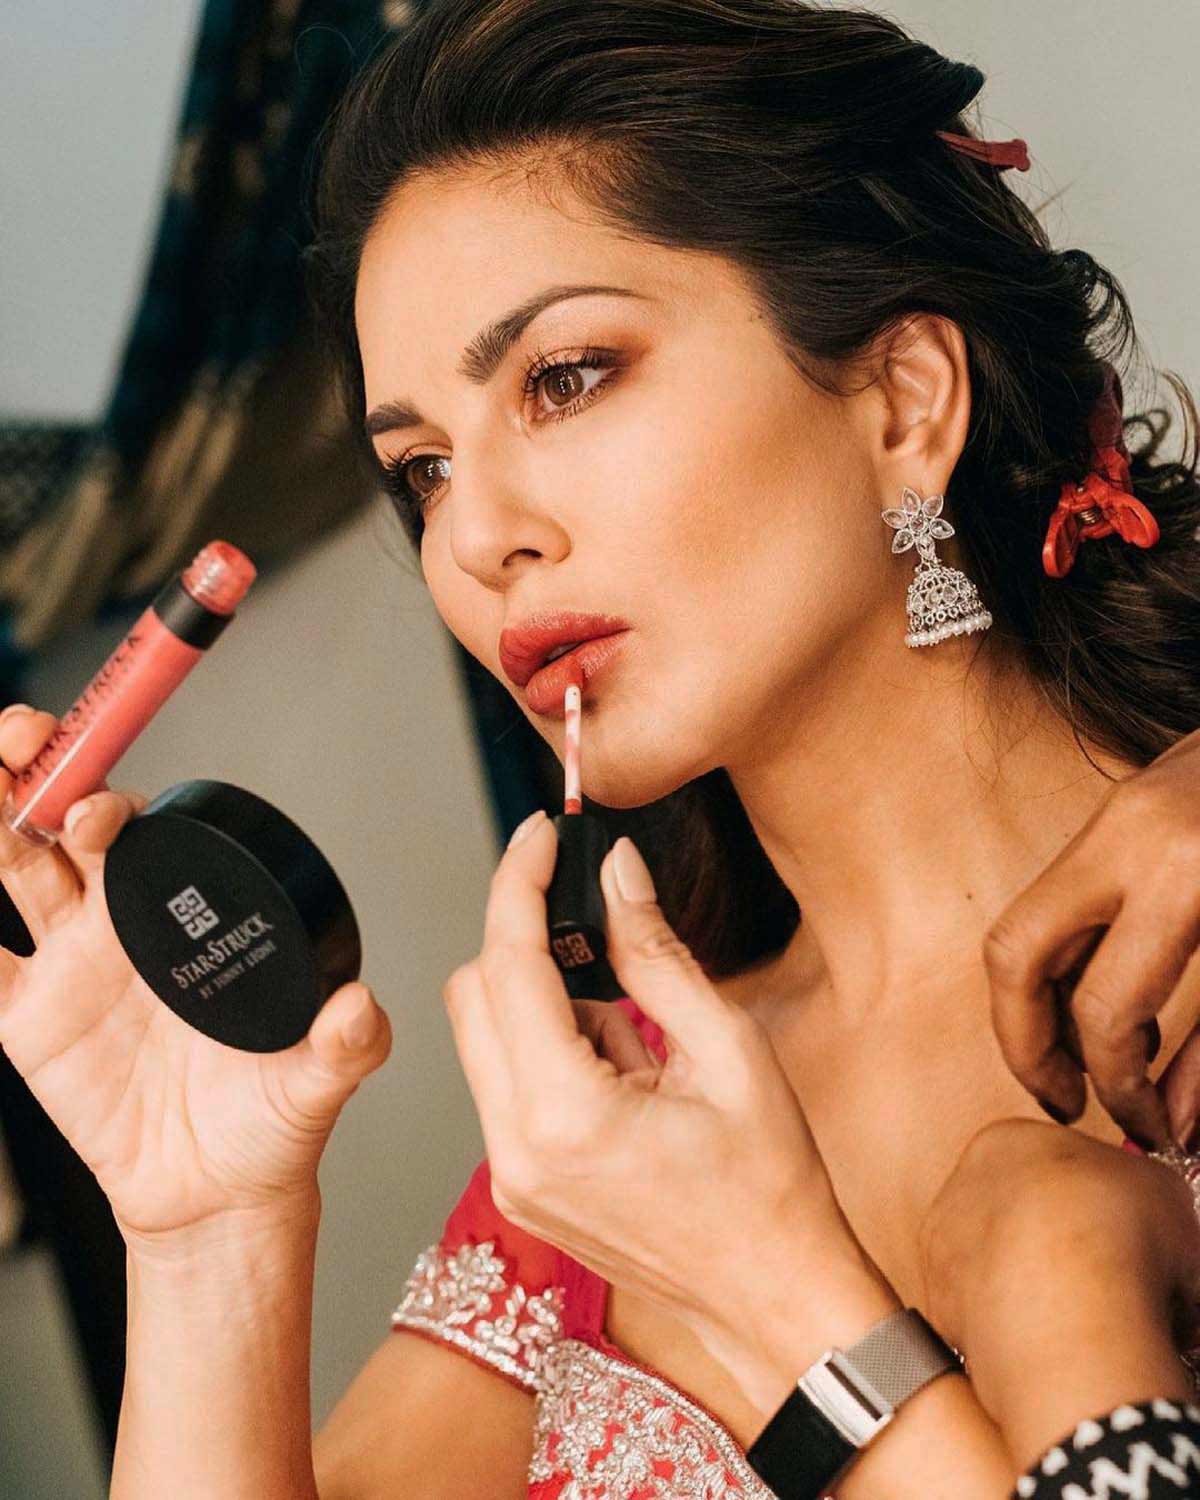 Sunny Leone gets ready for work - Rediff.com